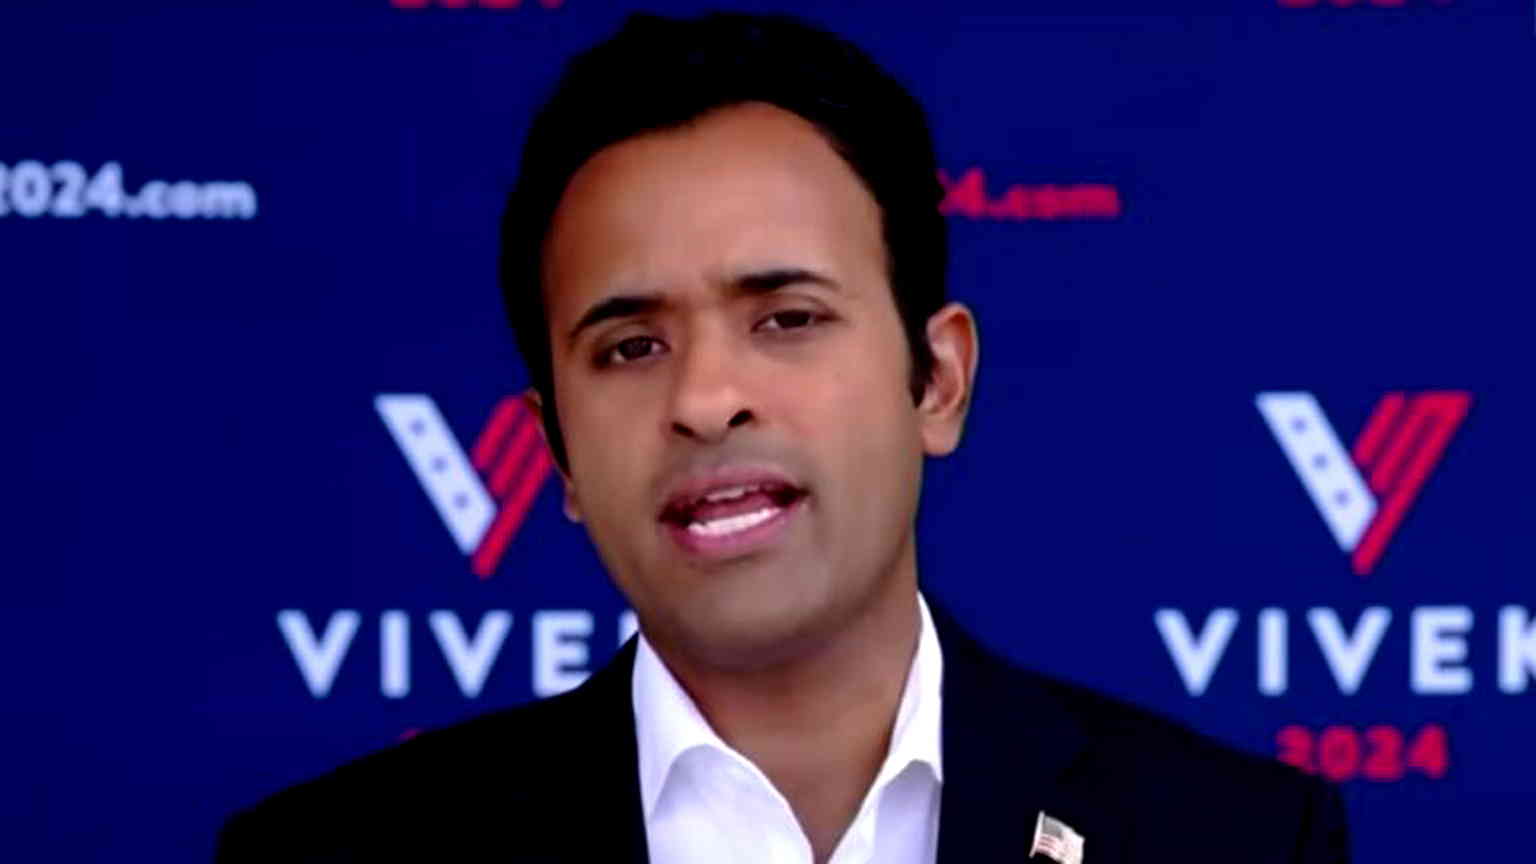 GOP presidential candidate Vivek Ramaswamy says China can have Taiwan after 2028 if he is elected